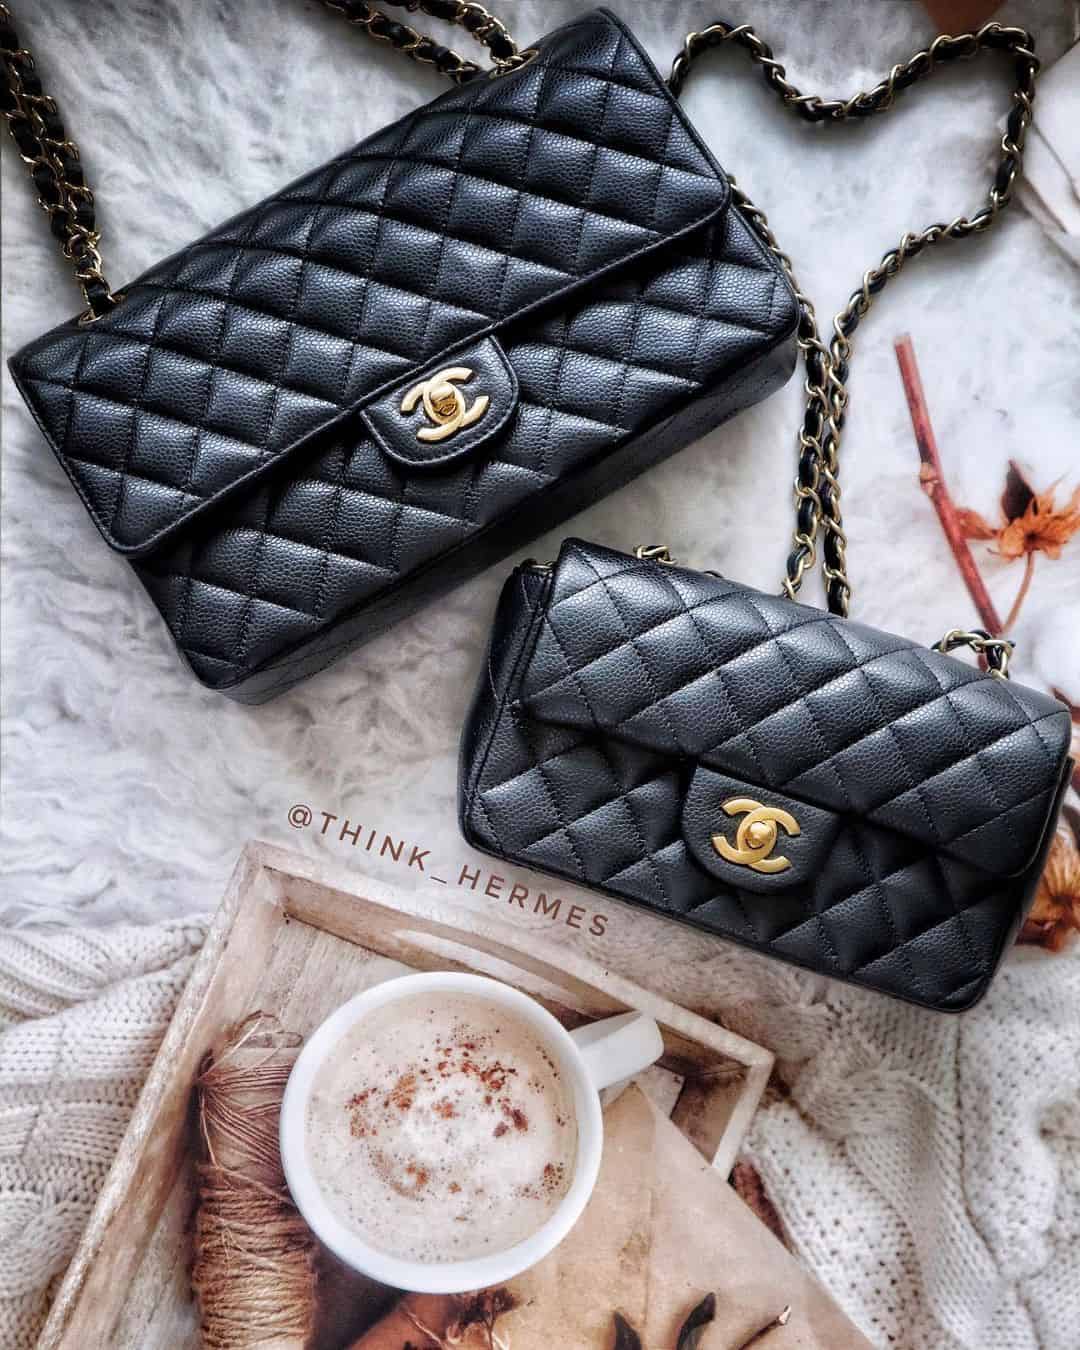 Classic Chanel Double flap bag, 2 Chanel bags, one Medium size double flap, one small size double flap bag